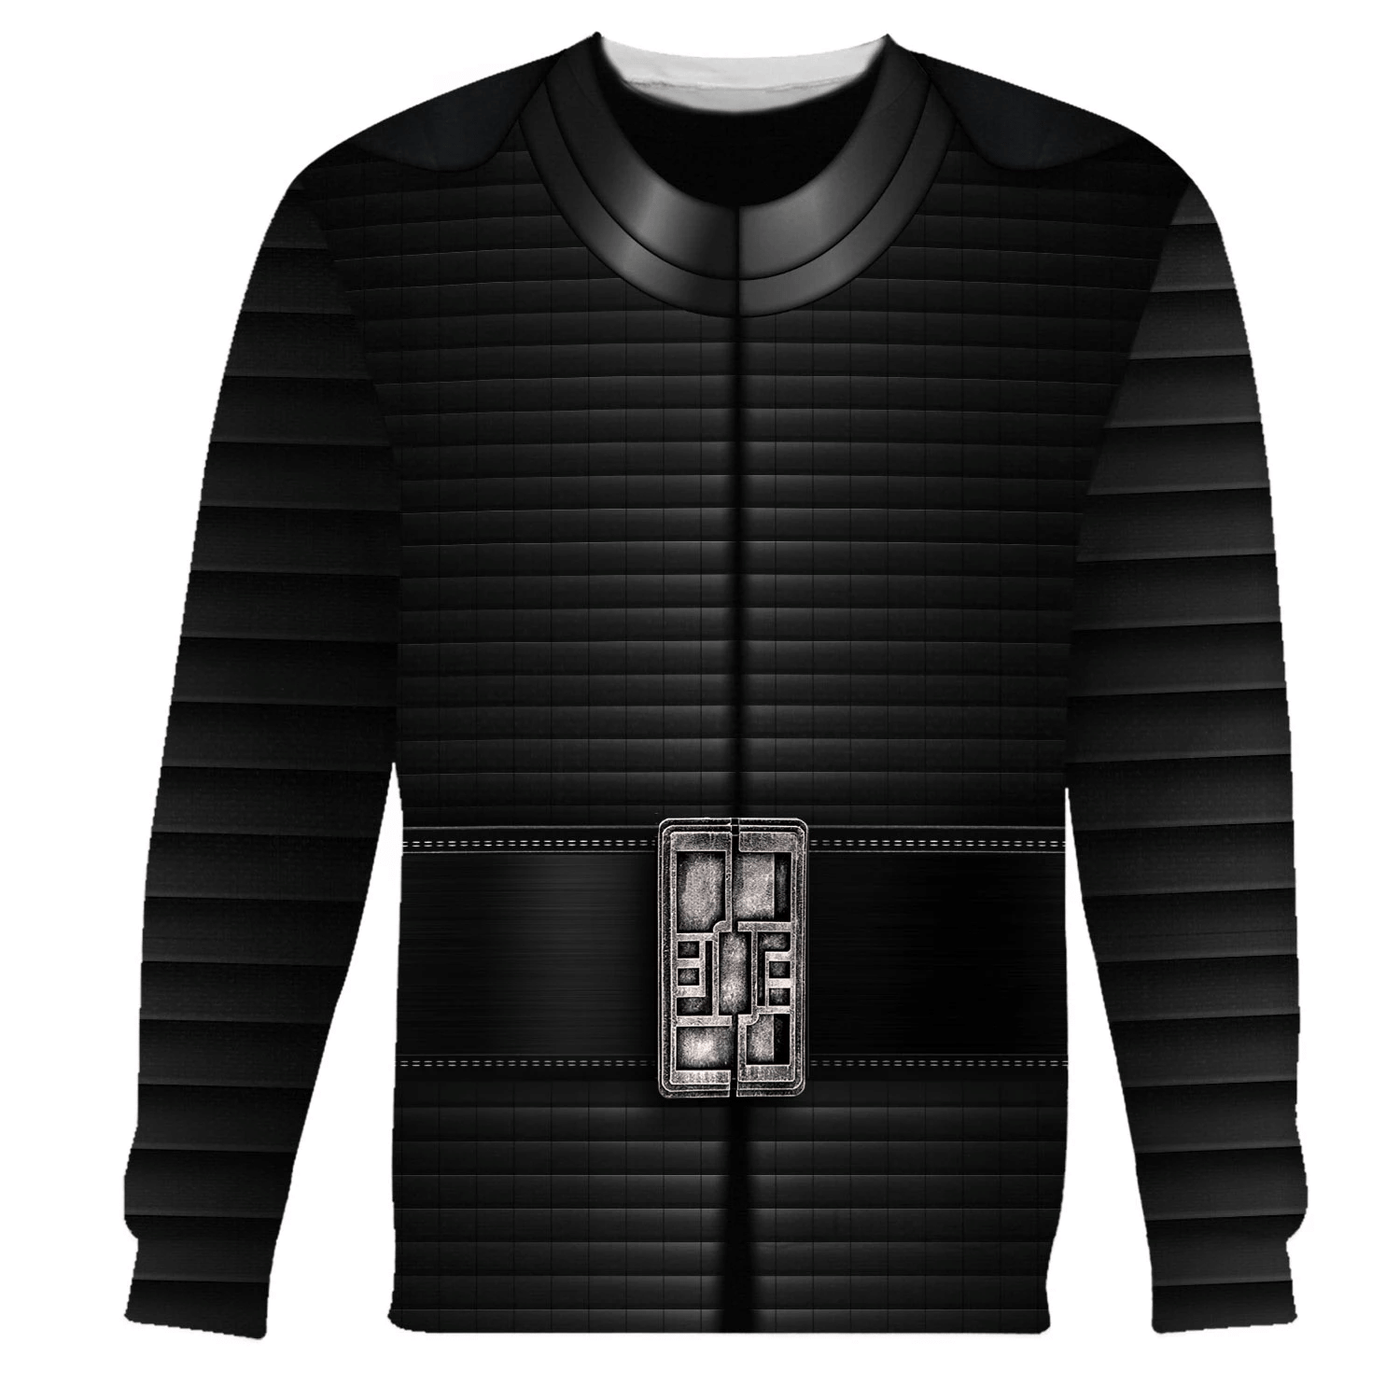 Star Wars Kylo Ren Costume - Sweater - Ugly Christmas Sweater